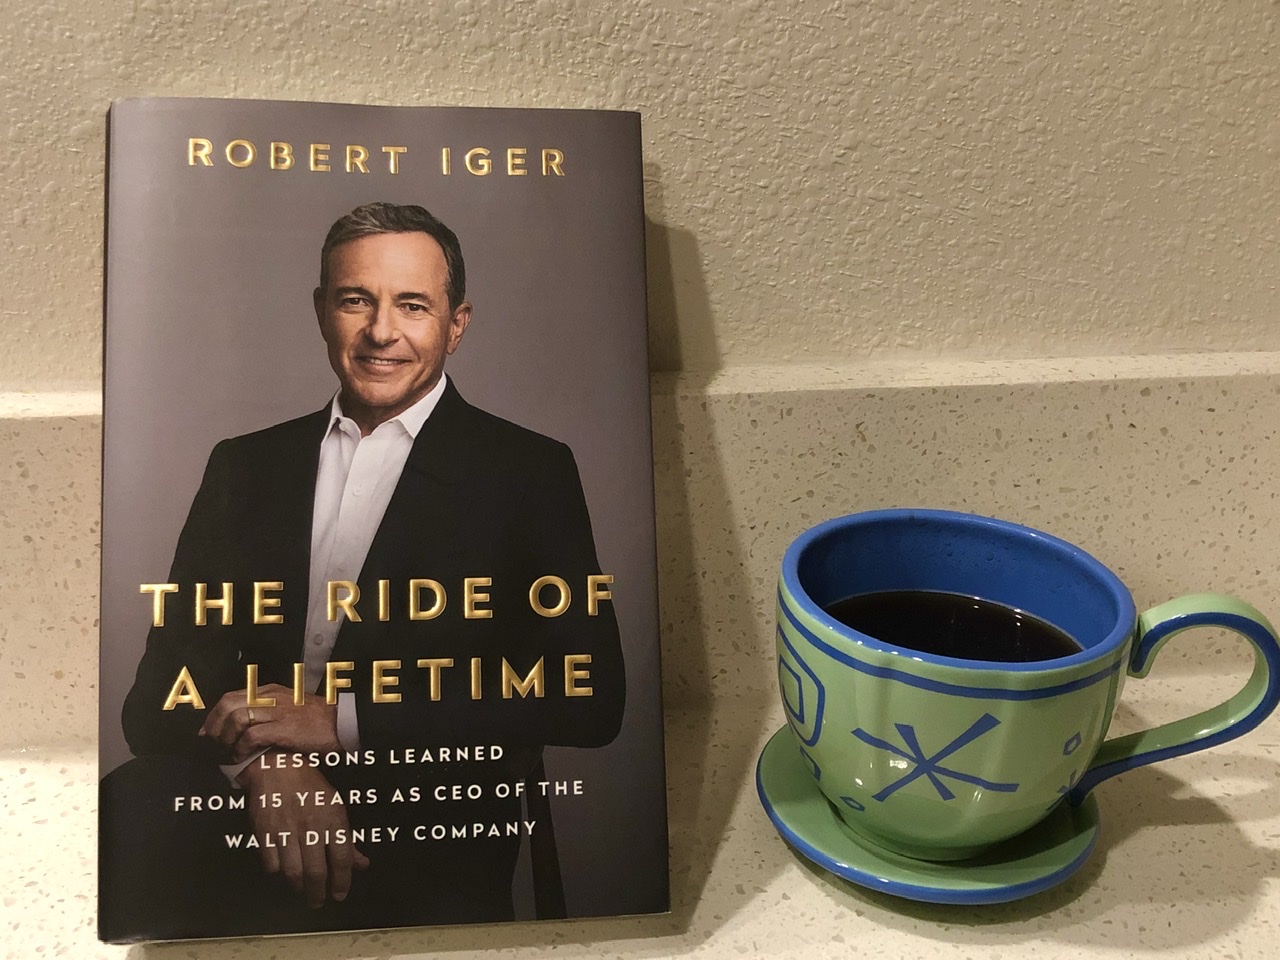 Book Review – “The Ride Of A Lifetime” by Robert Iger